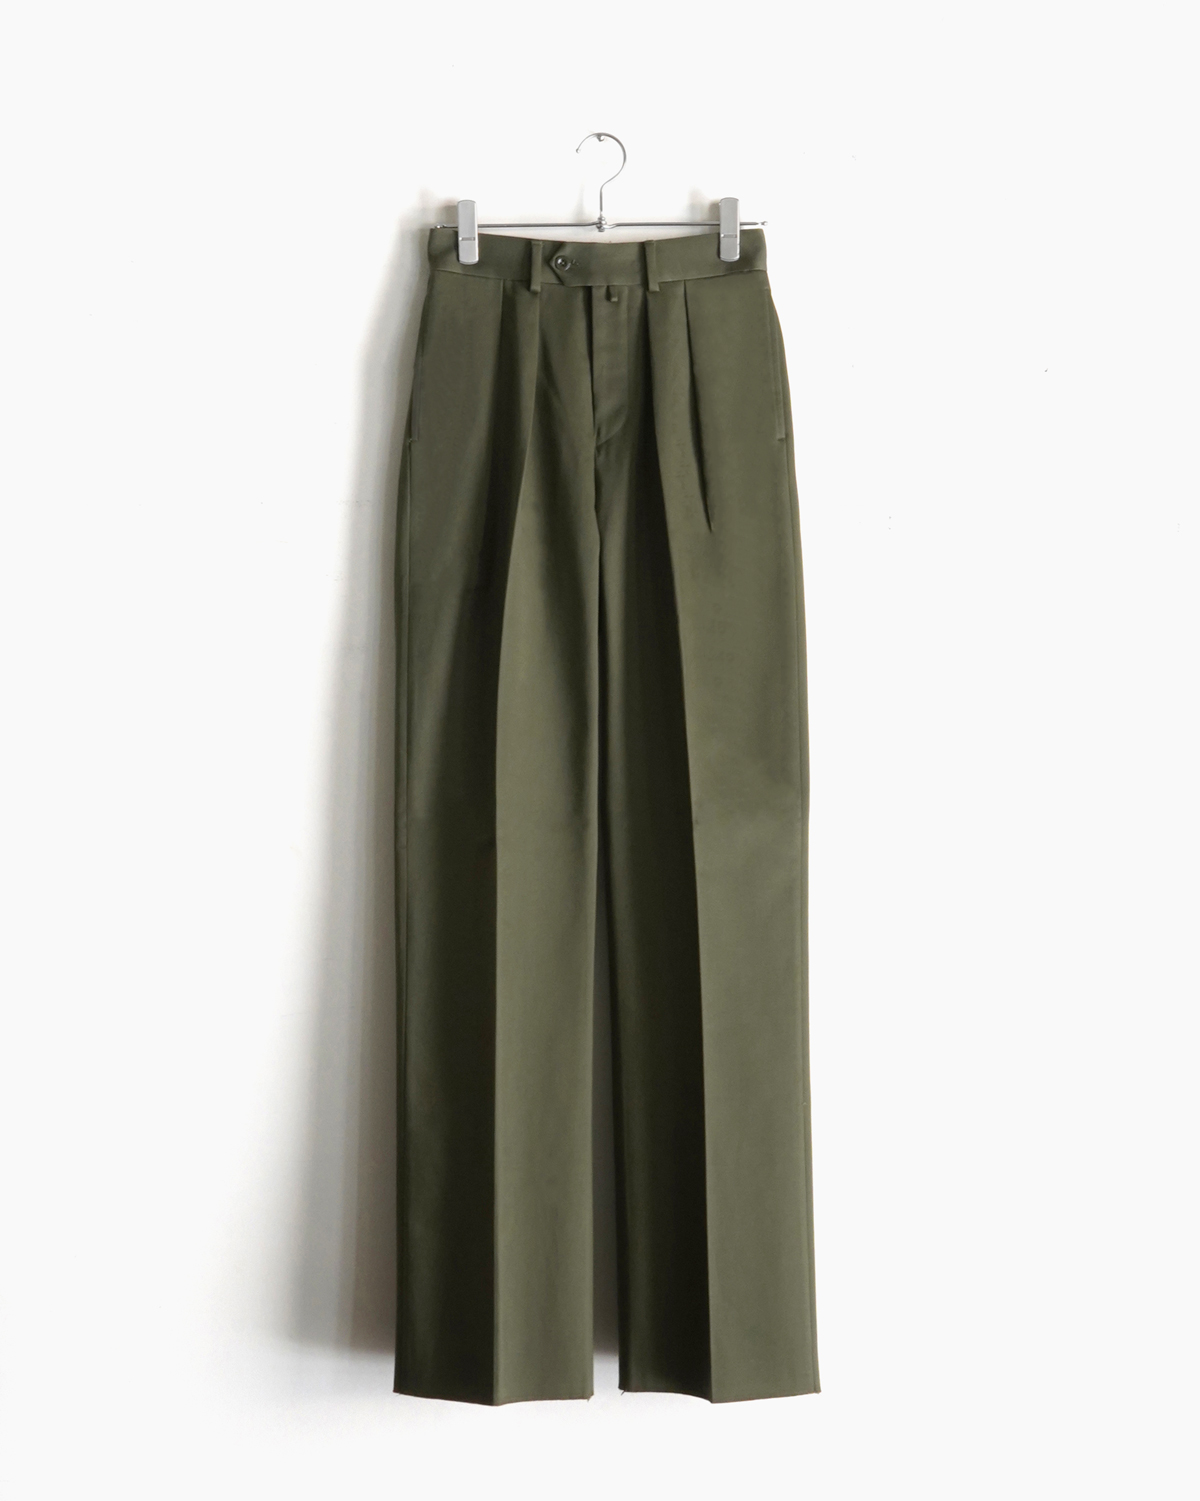 NEAT｜COTTON SATIN │WIDE - OLIVE｜PRODUCT｜Continuer Inc.｜メガネ 